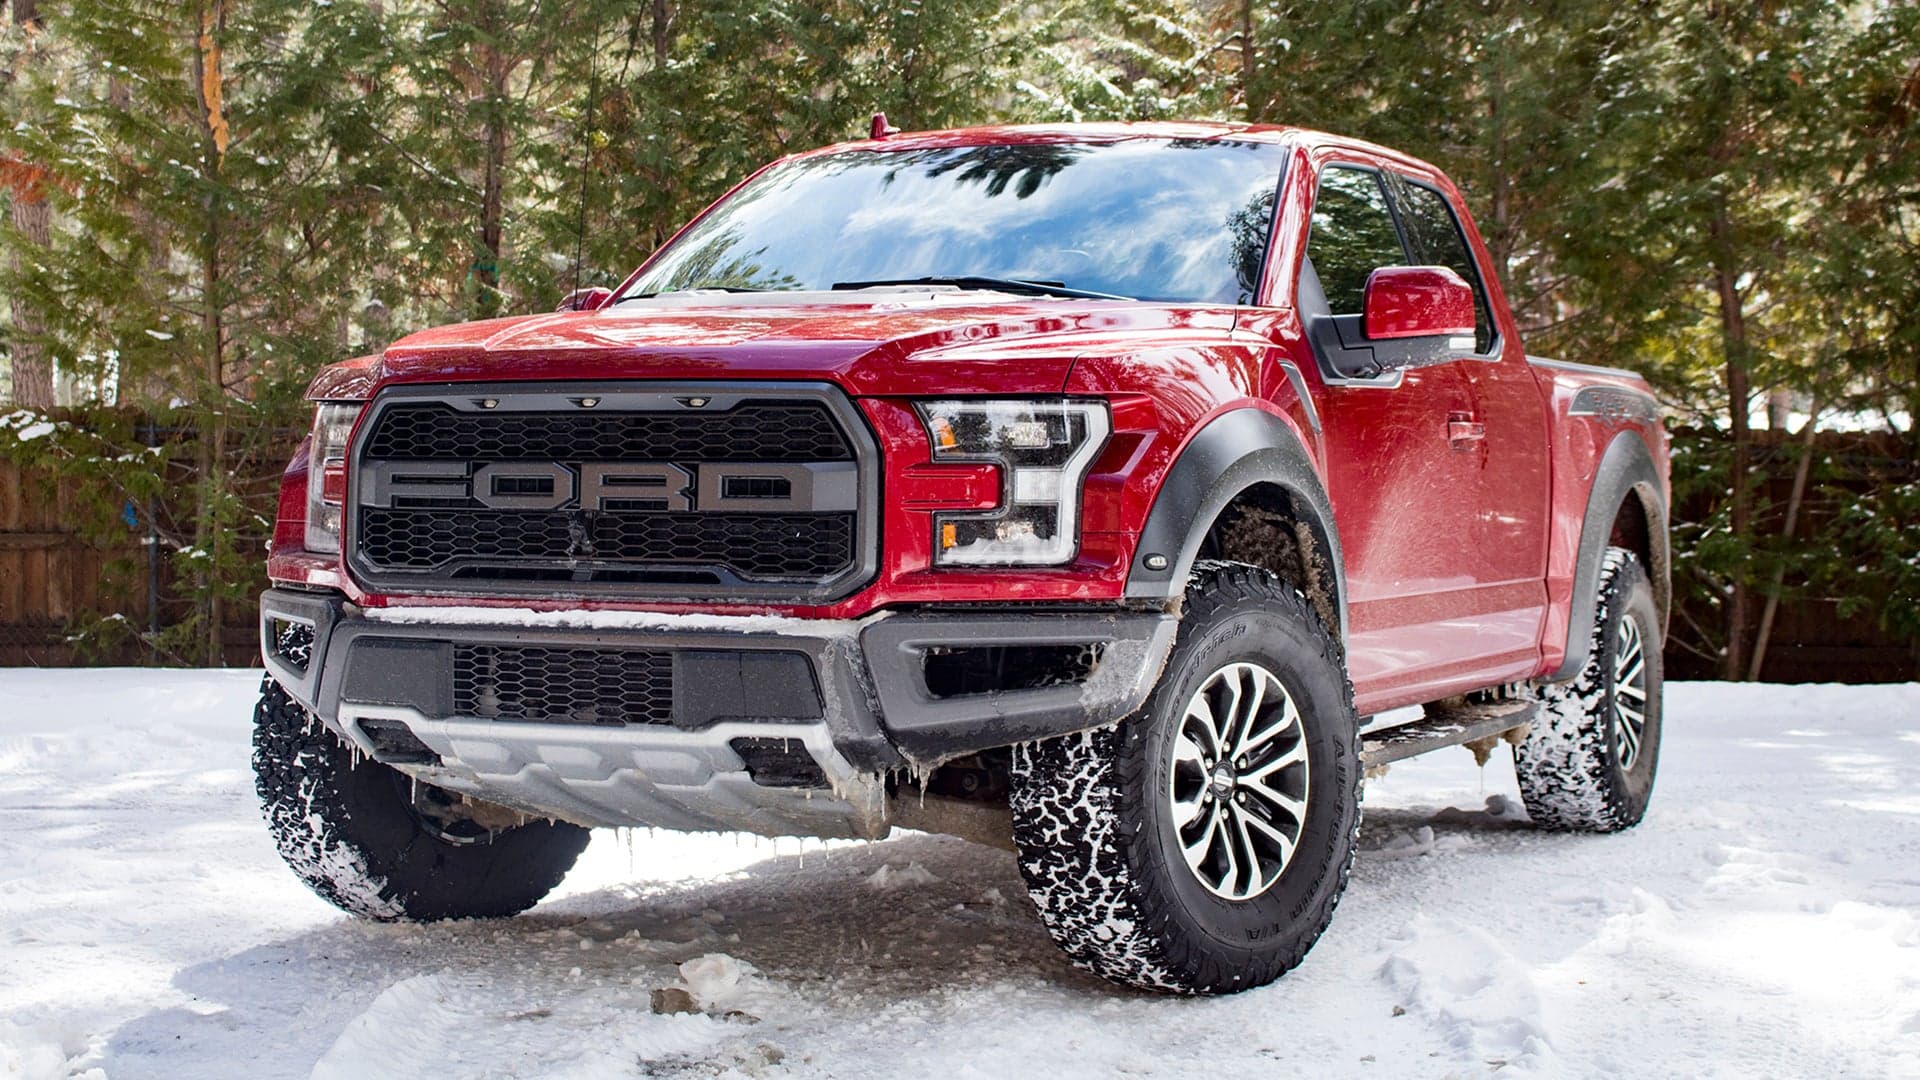 2019 Ford F-150 Raptor SuperCab Review: The Ultimate Pickup Truck Bows to No One